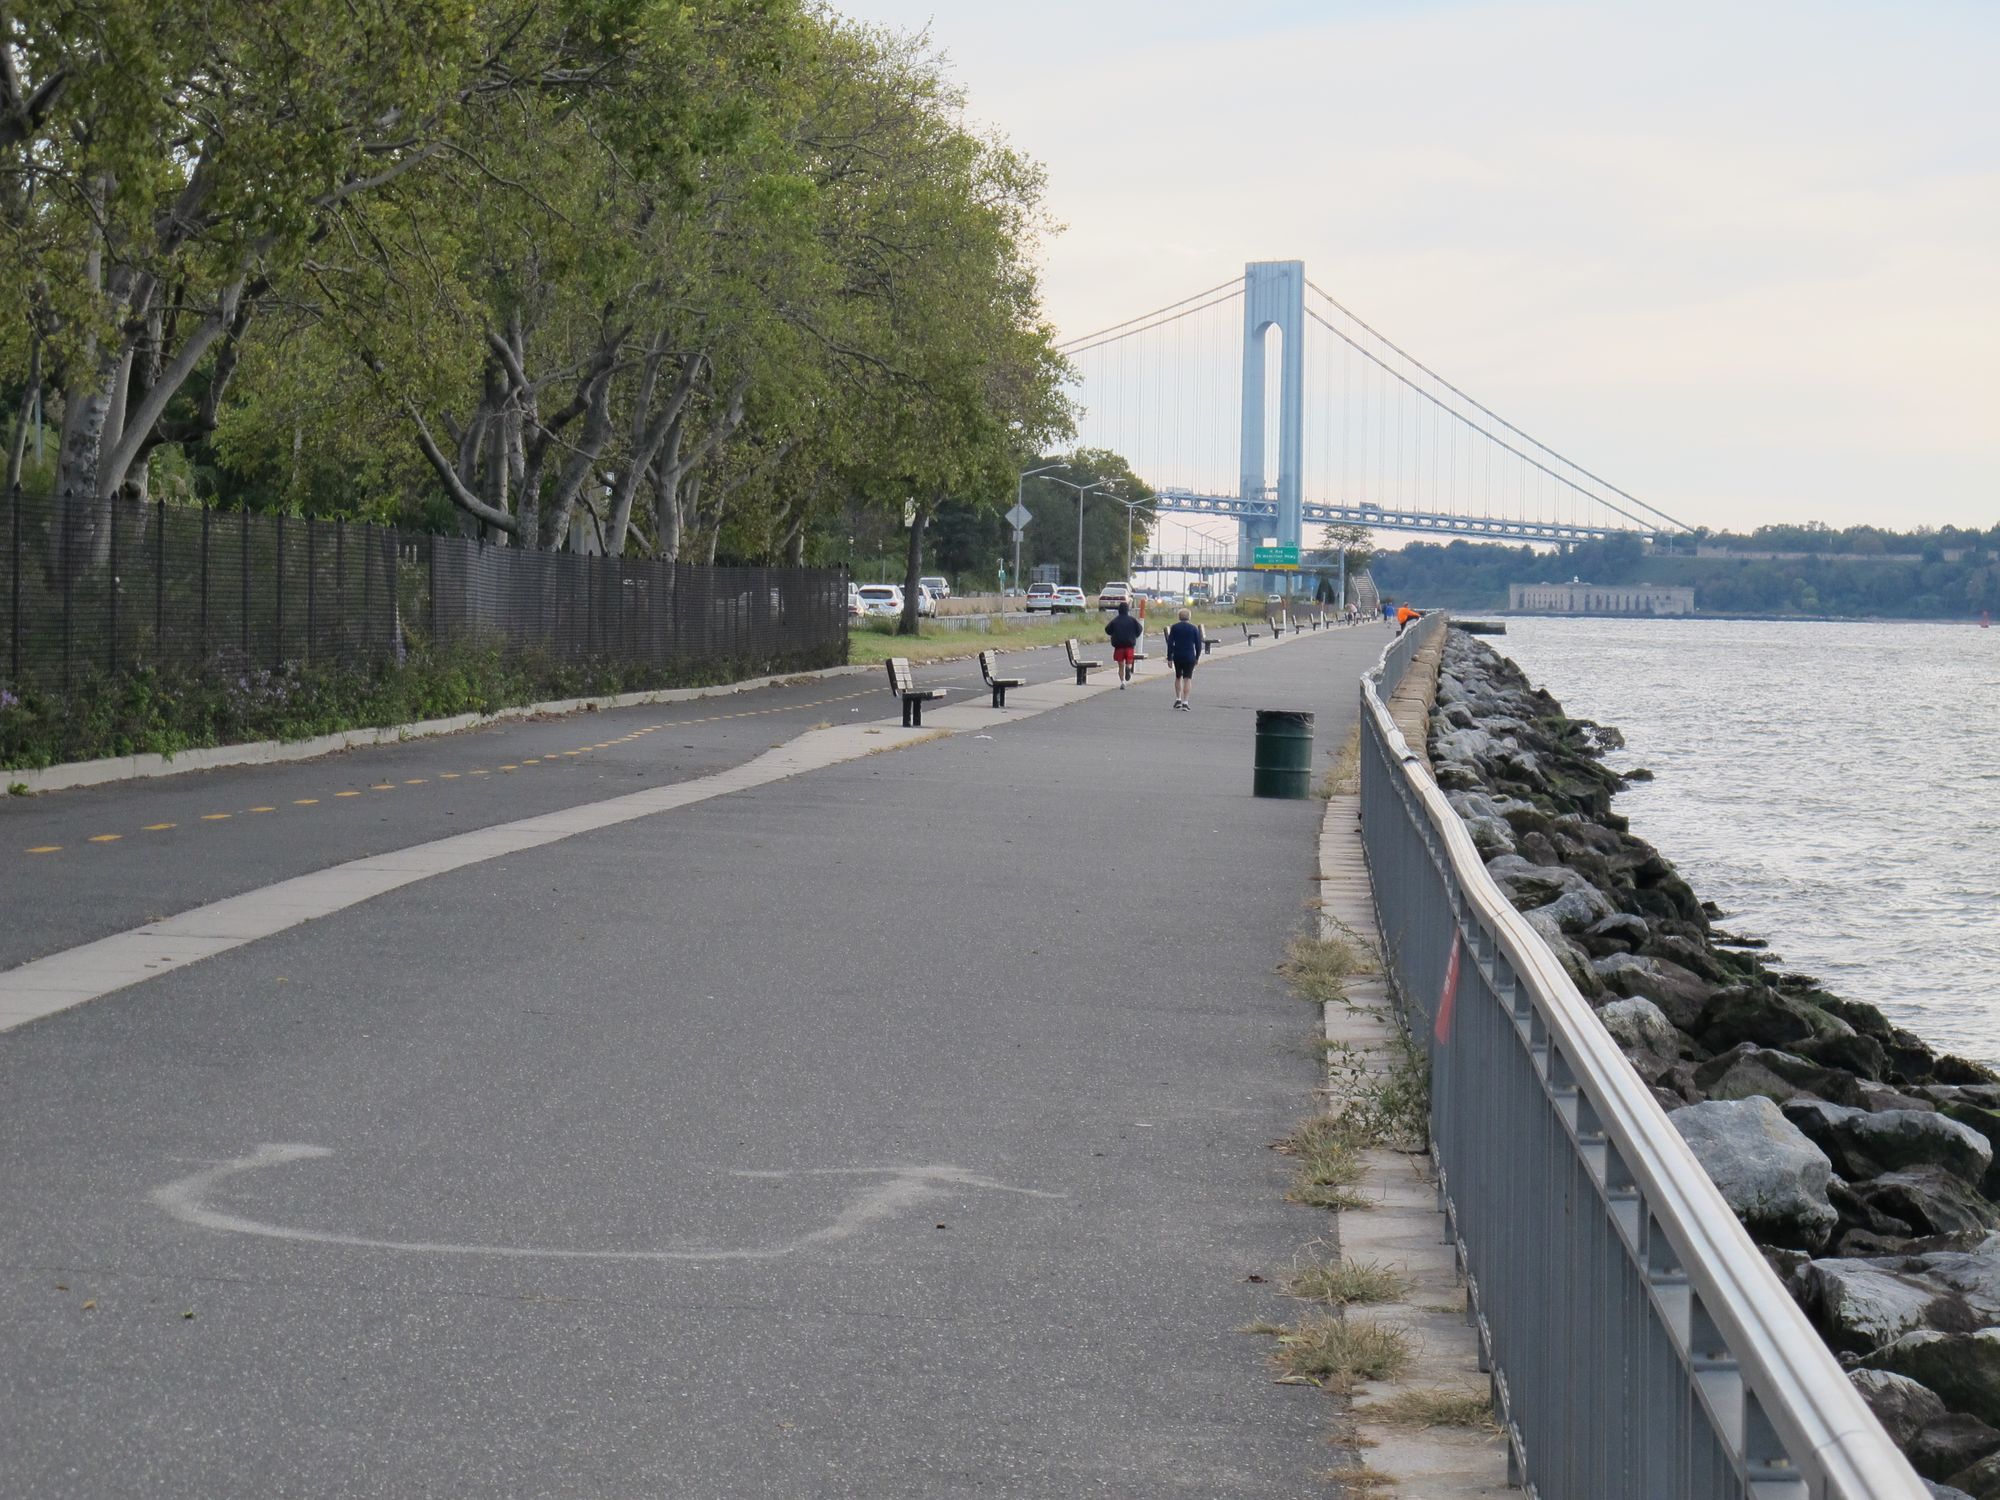 After $2 million to repair cave-ins along Shore Road Promenade, CB10 to request a proper study